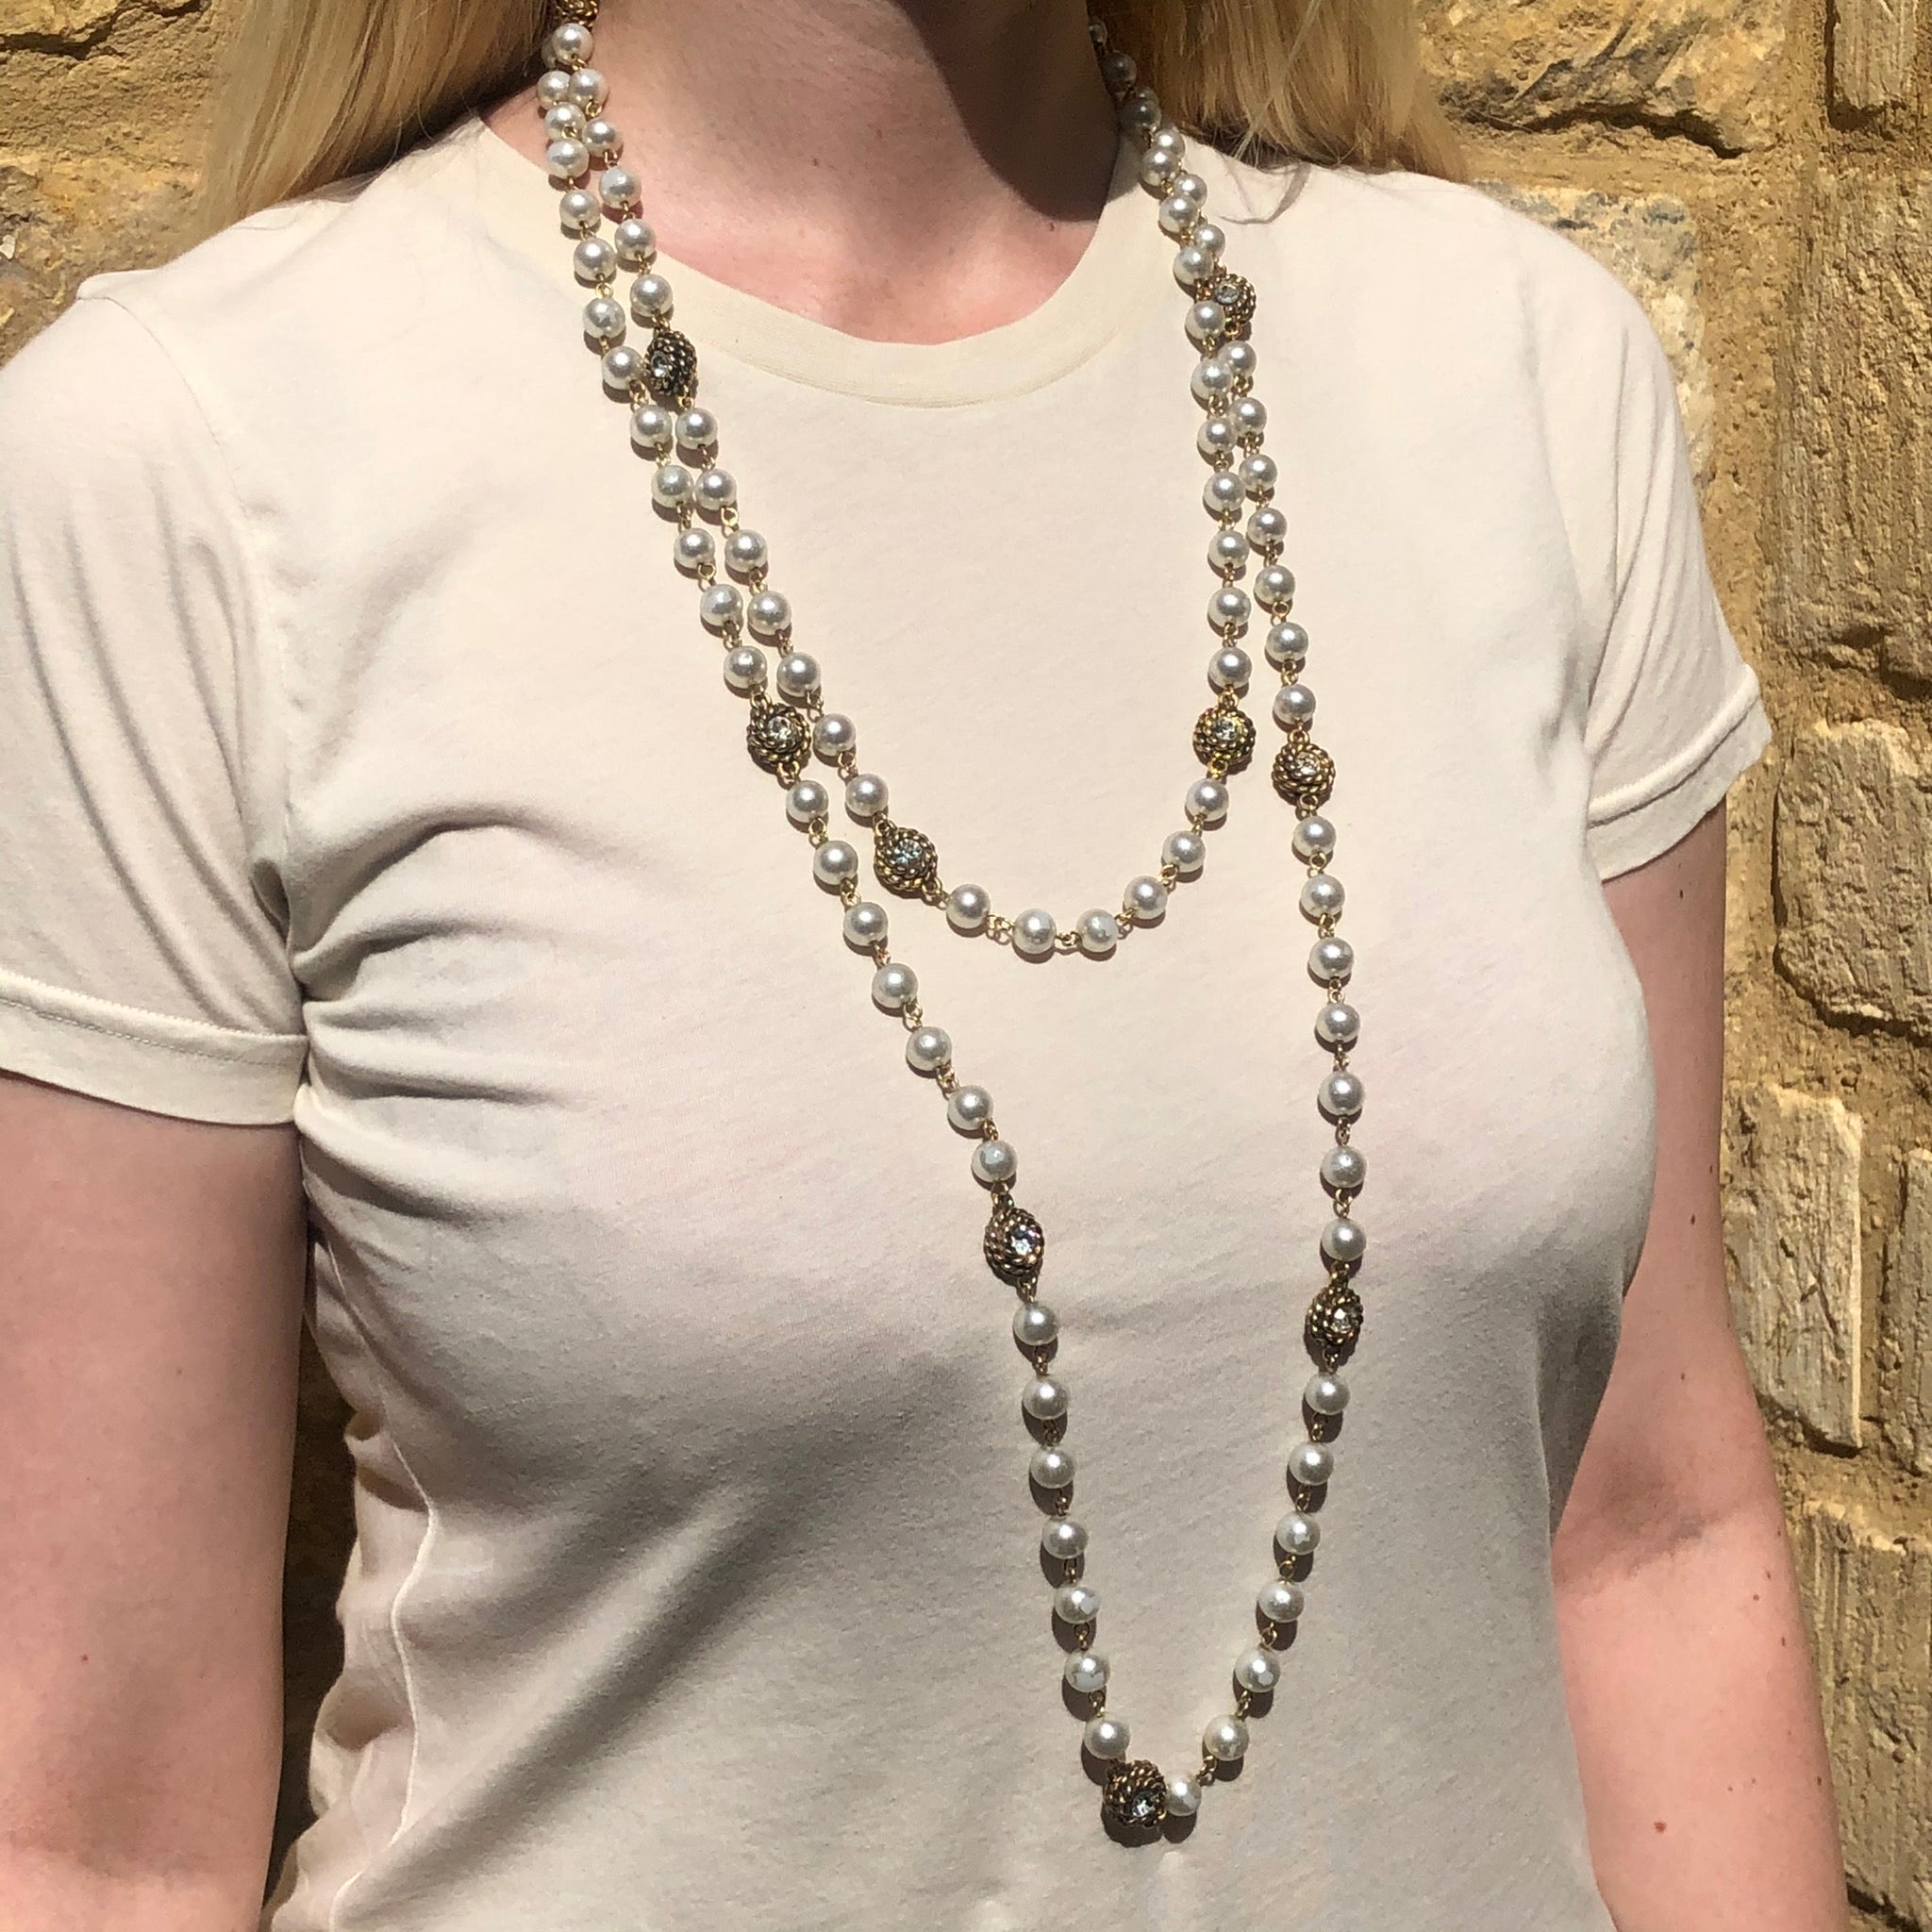 chanel necklace with pearl drop pendant